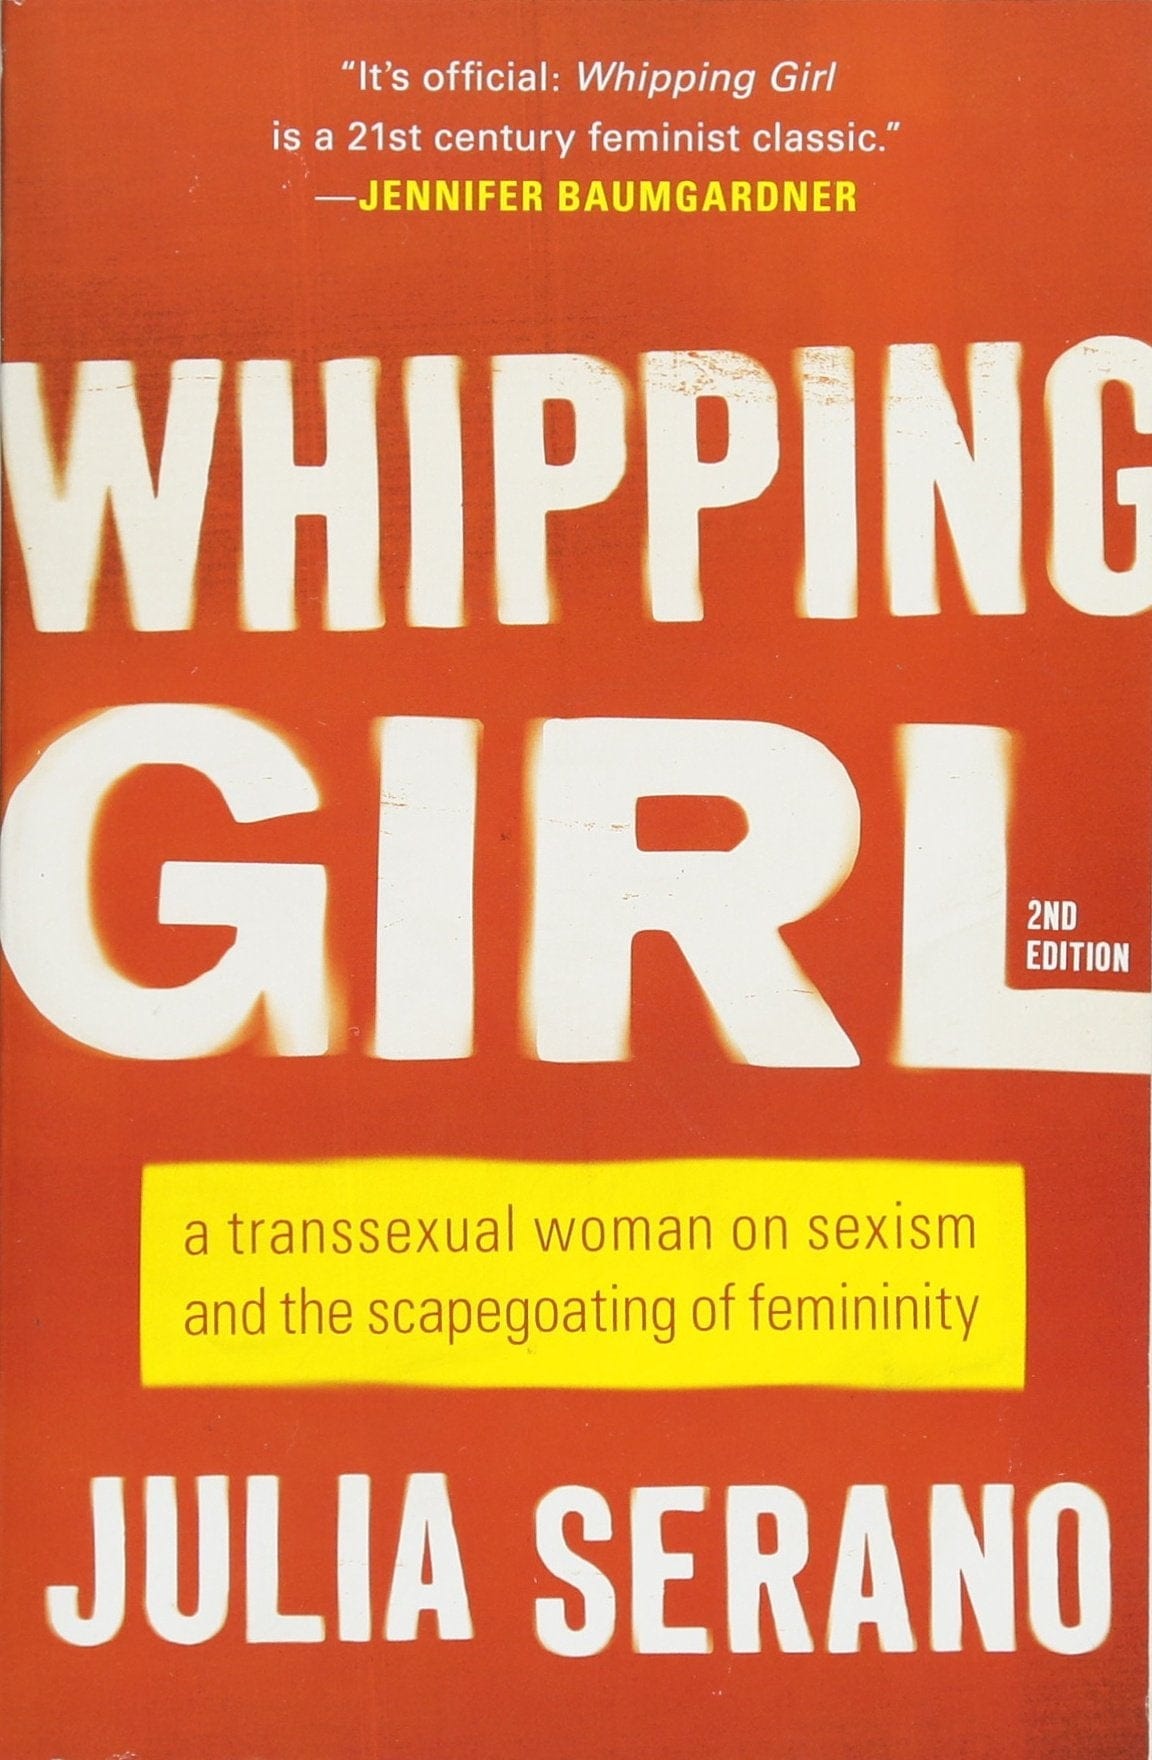 Whipping Girl: Transsexual Woman on Sexism and the Scapegoating of Femininity - Third Eye